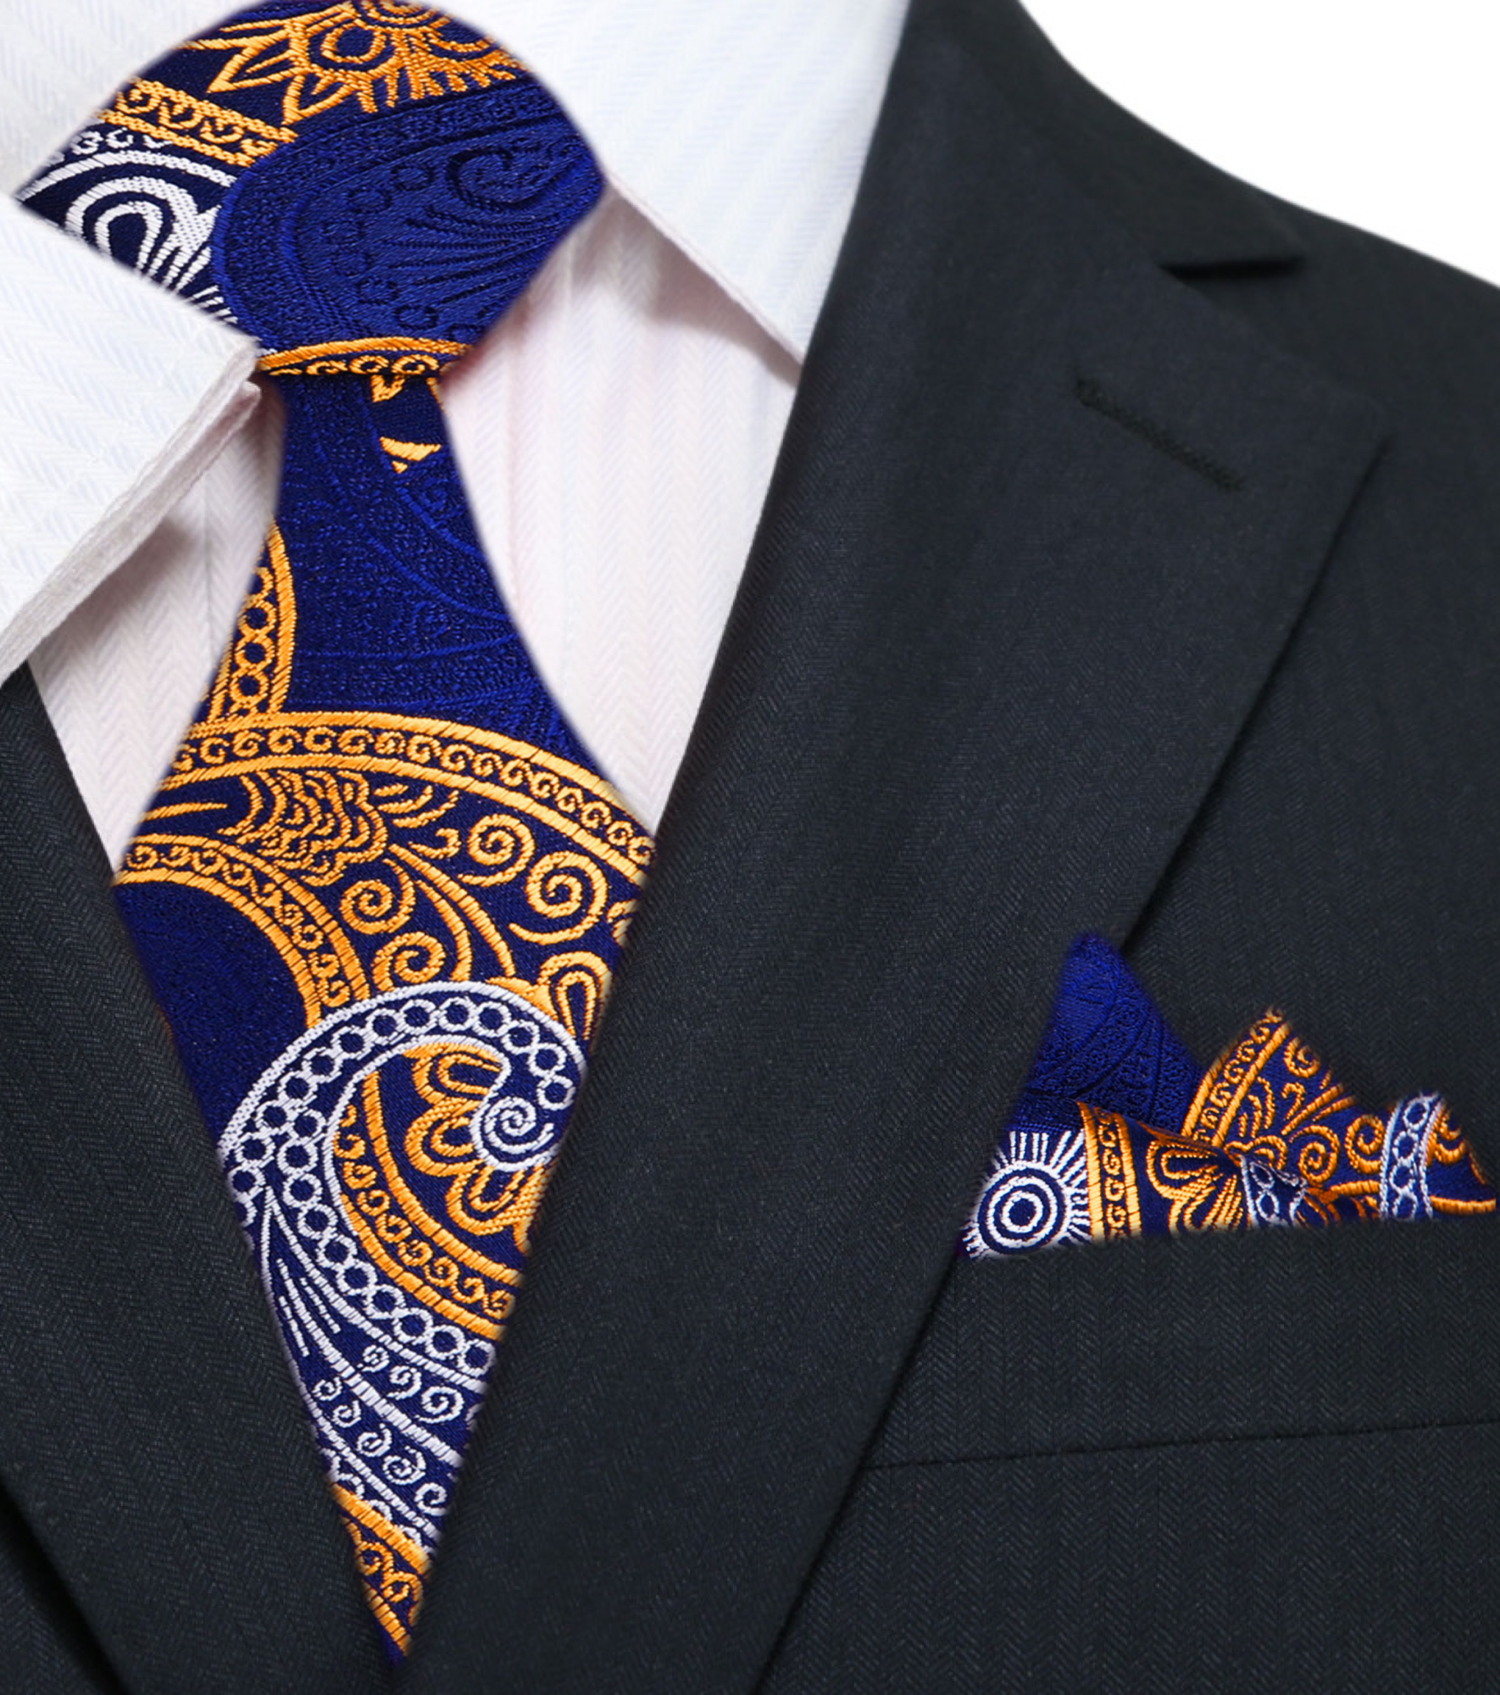 Main: A Dark Blue, Yellow, White Paisley Pattern Necktie With Matching Pocket Square